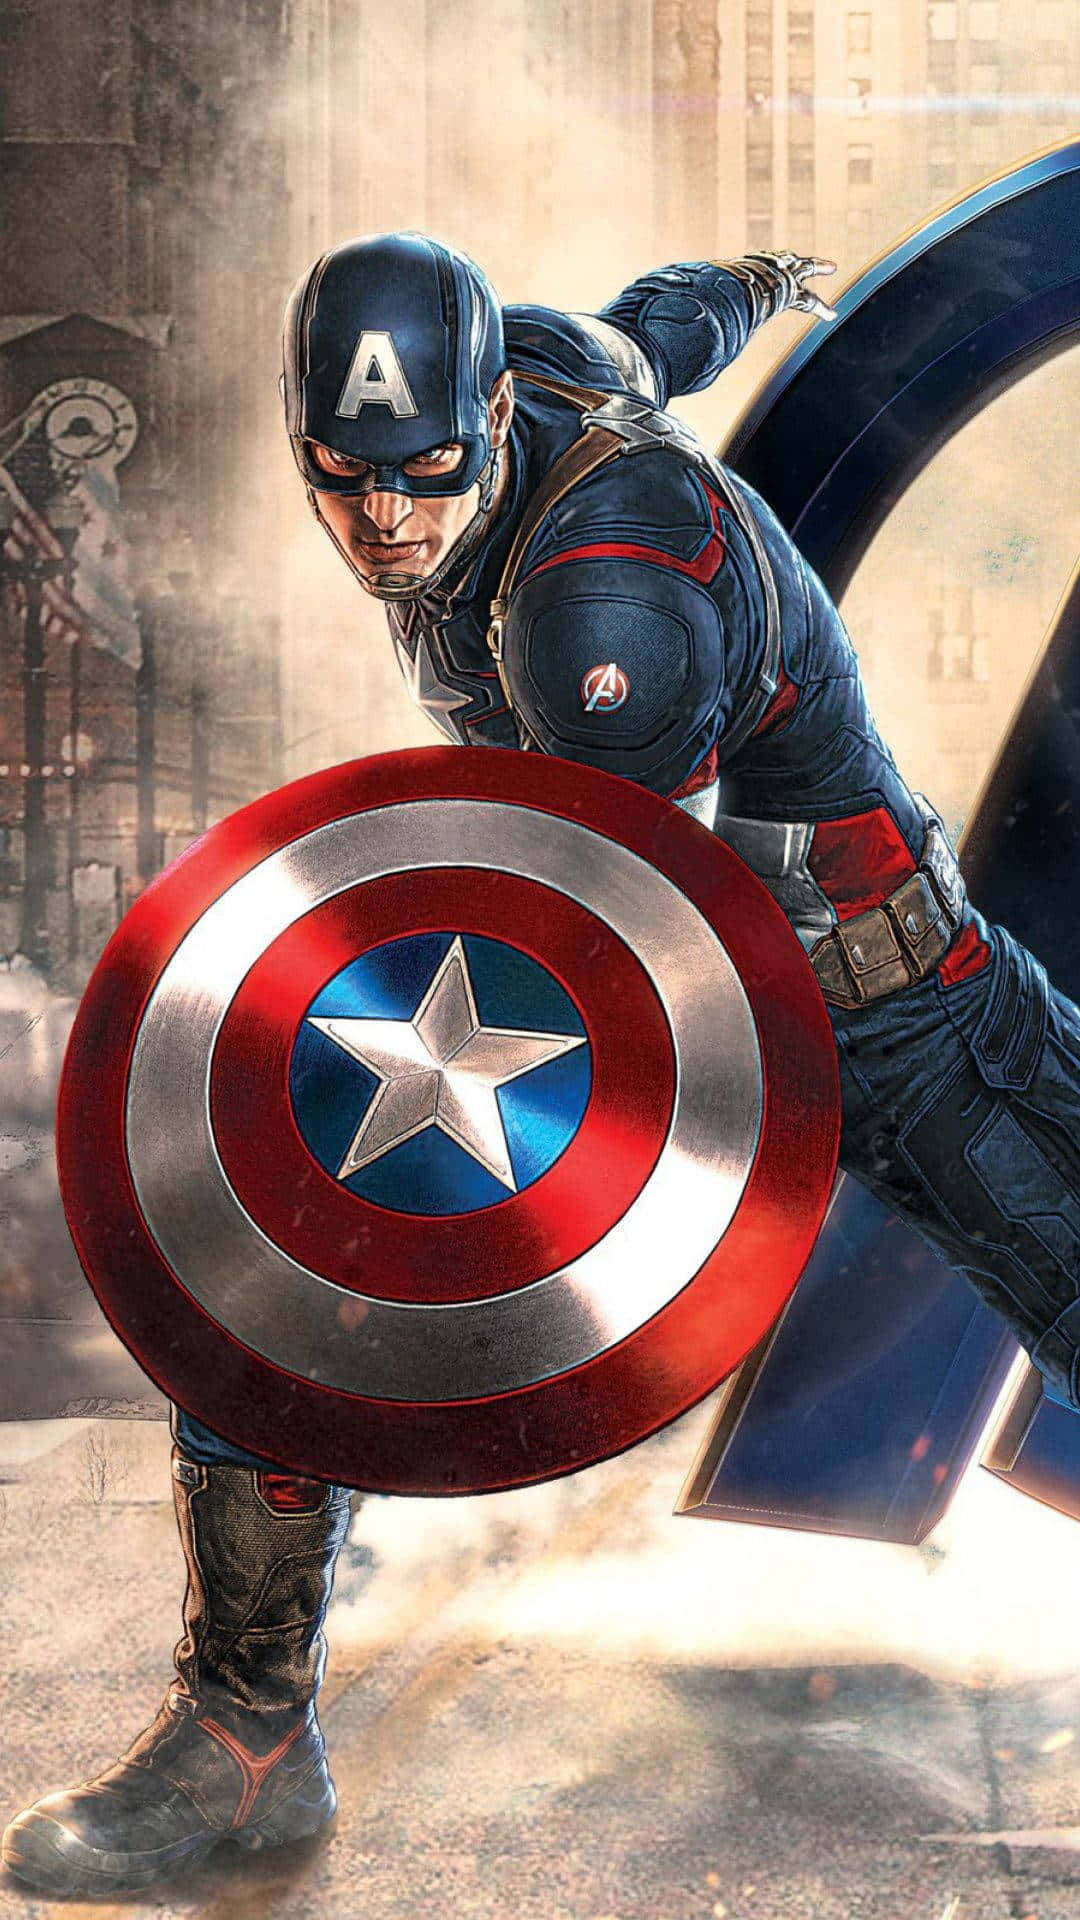 Ready for action - Captain America